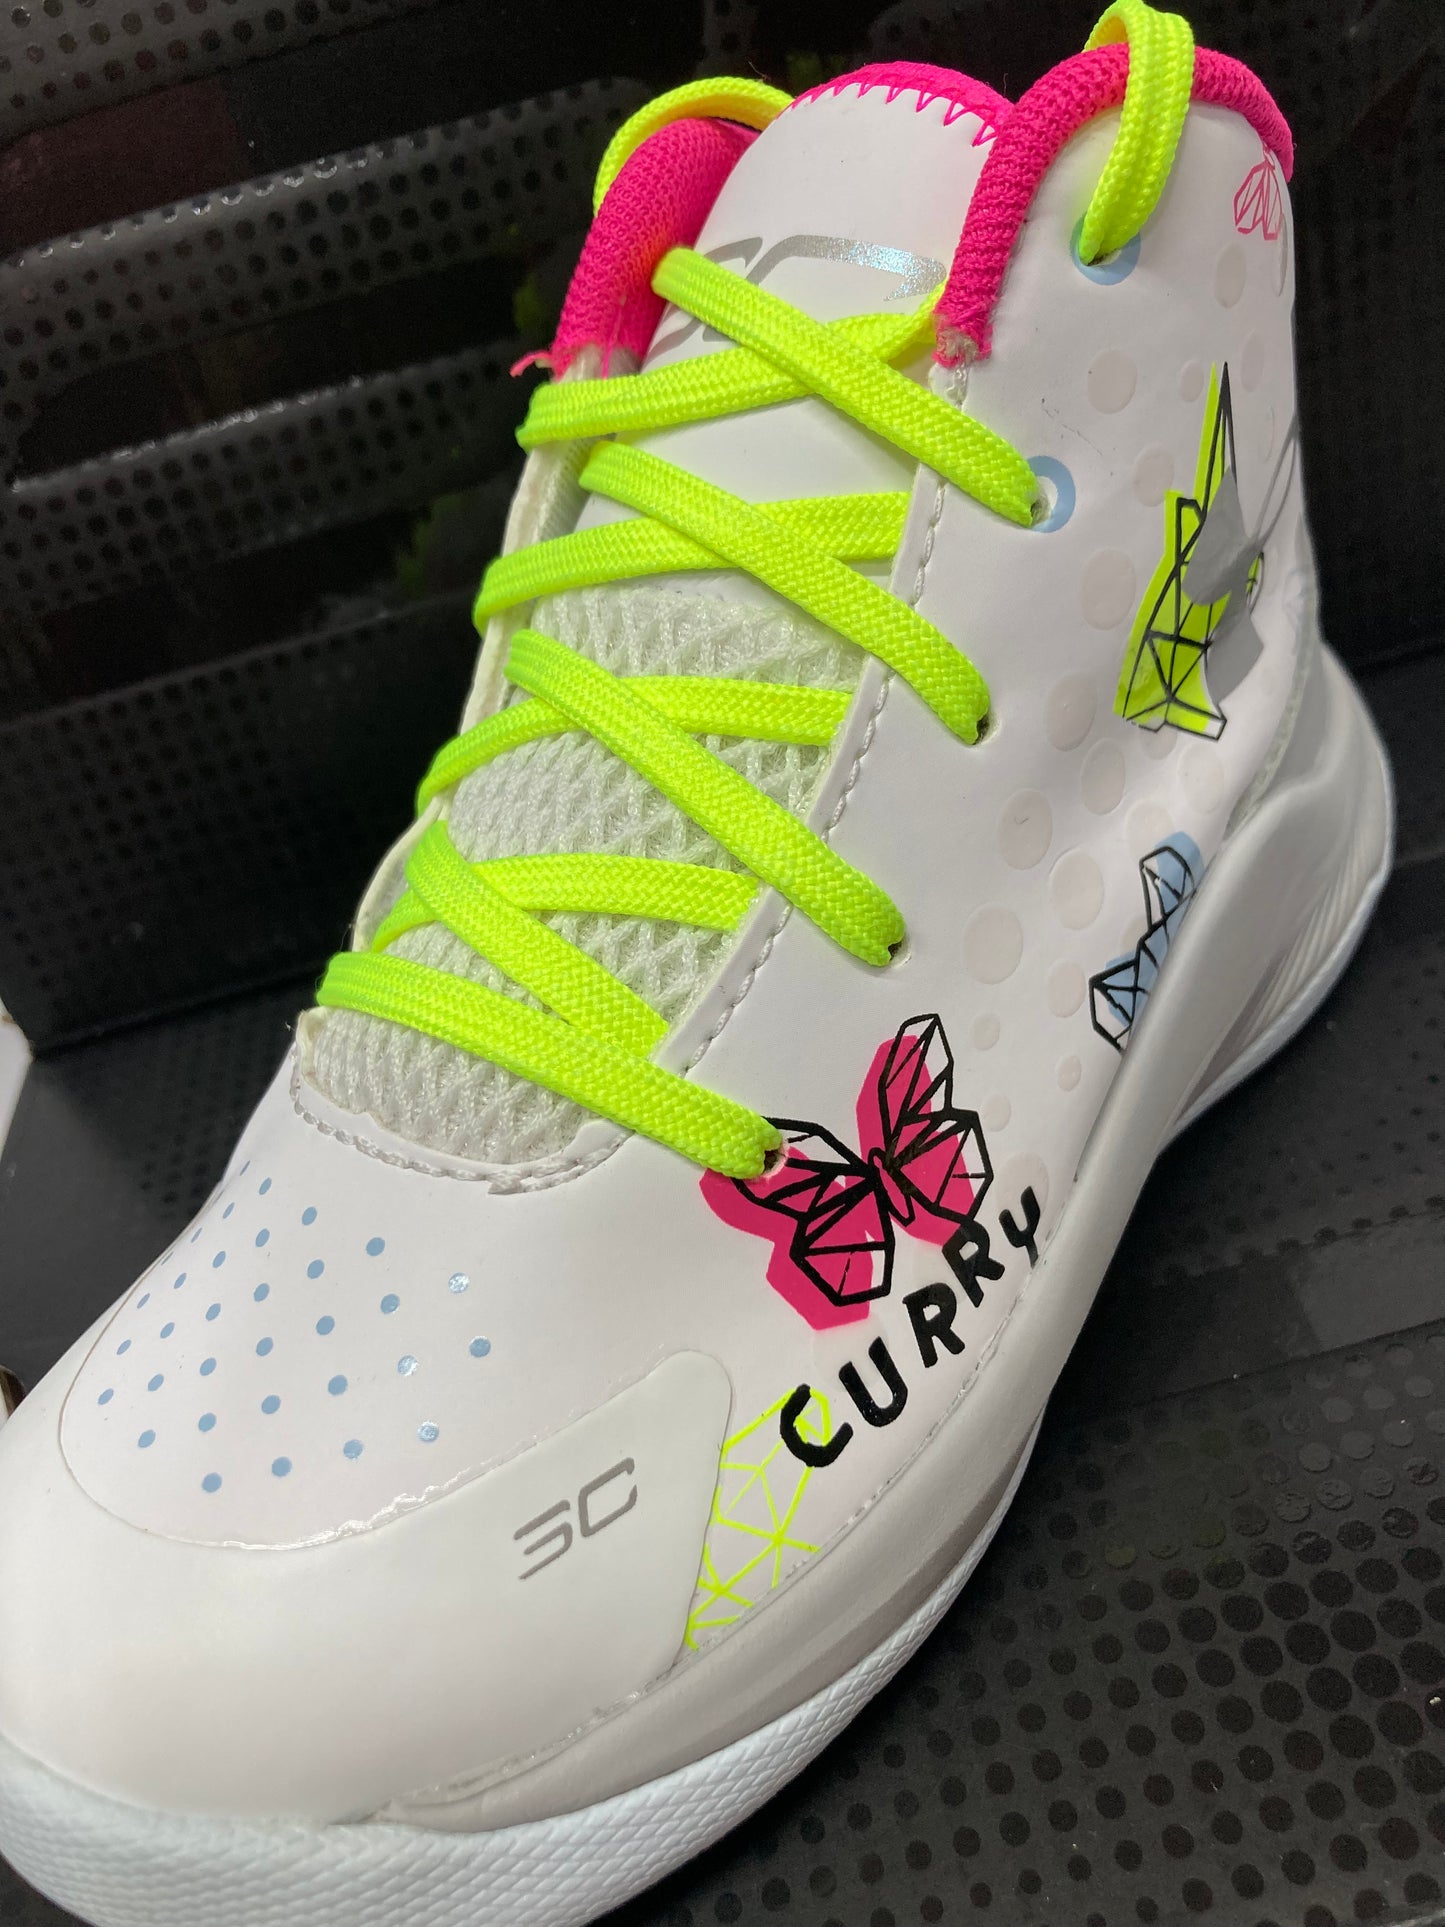 Under Armour Curry 1 TD 'Tattoo'